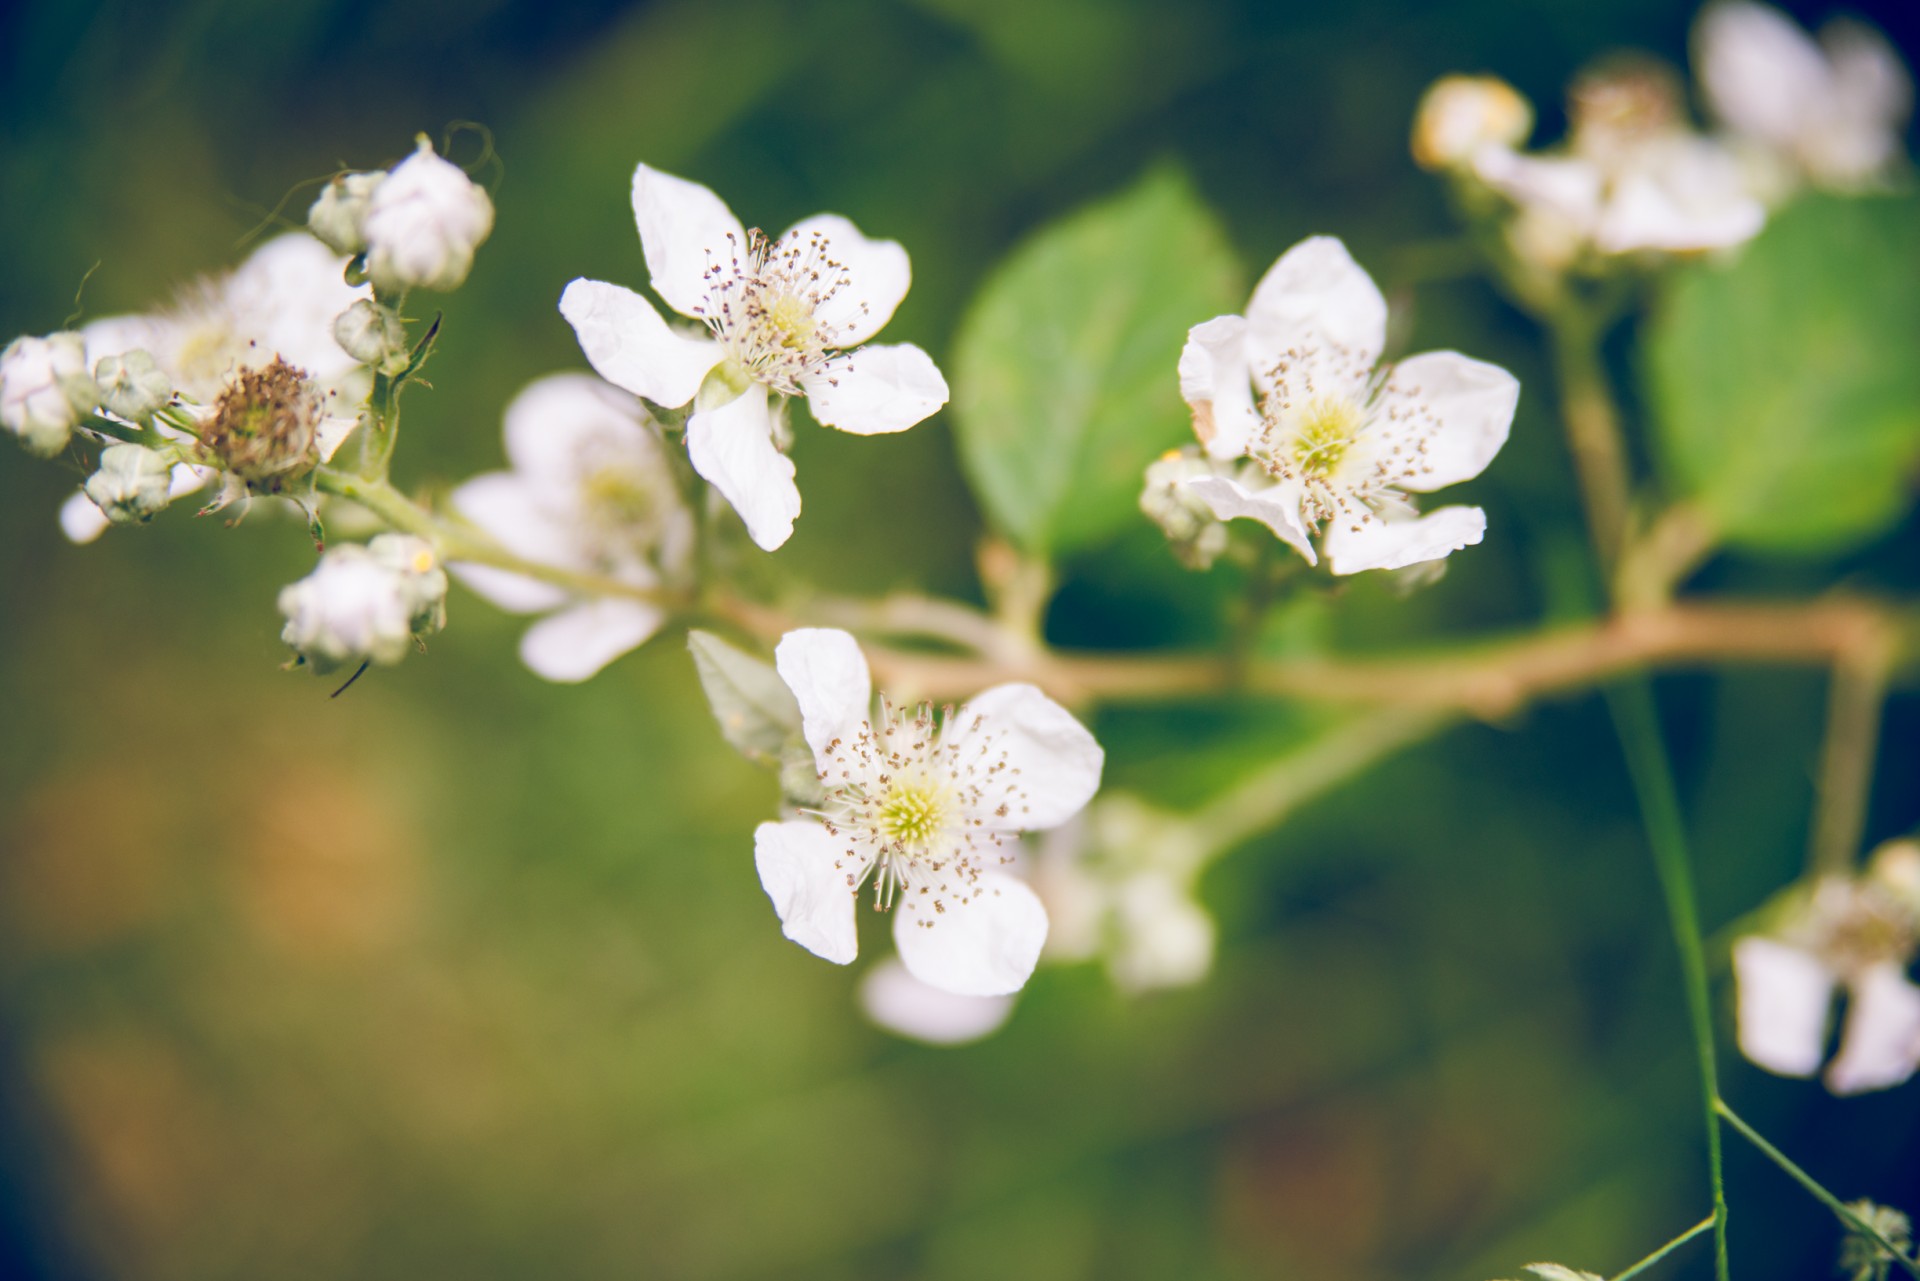 blackberry blossoms flowers free photo